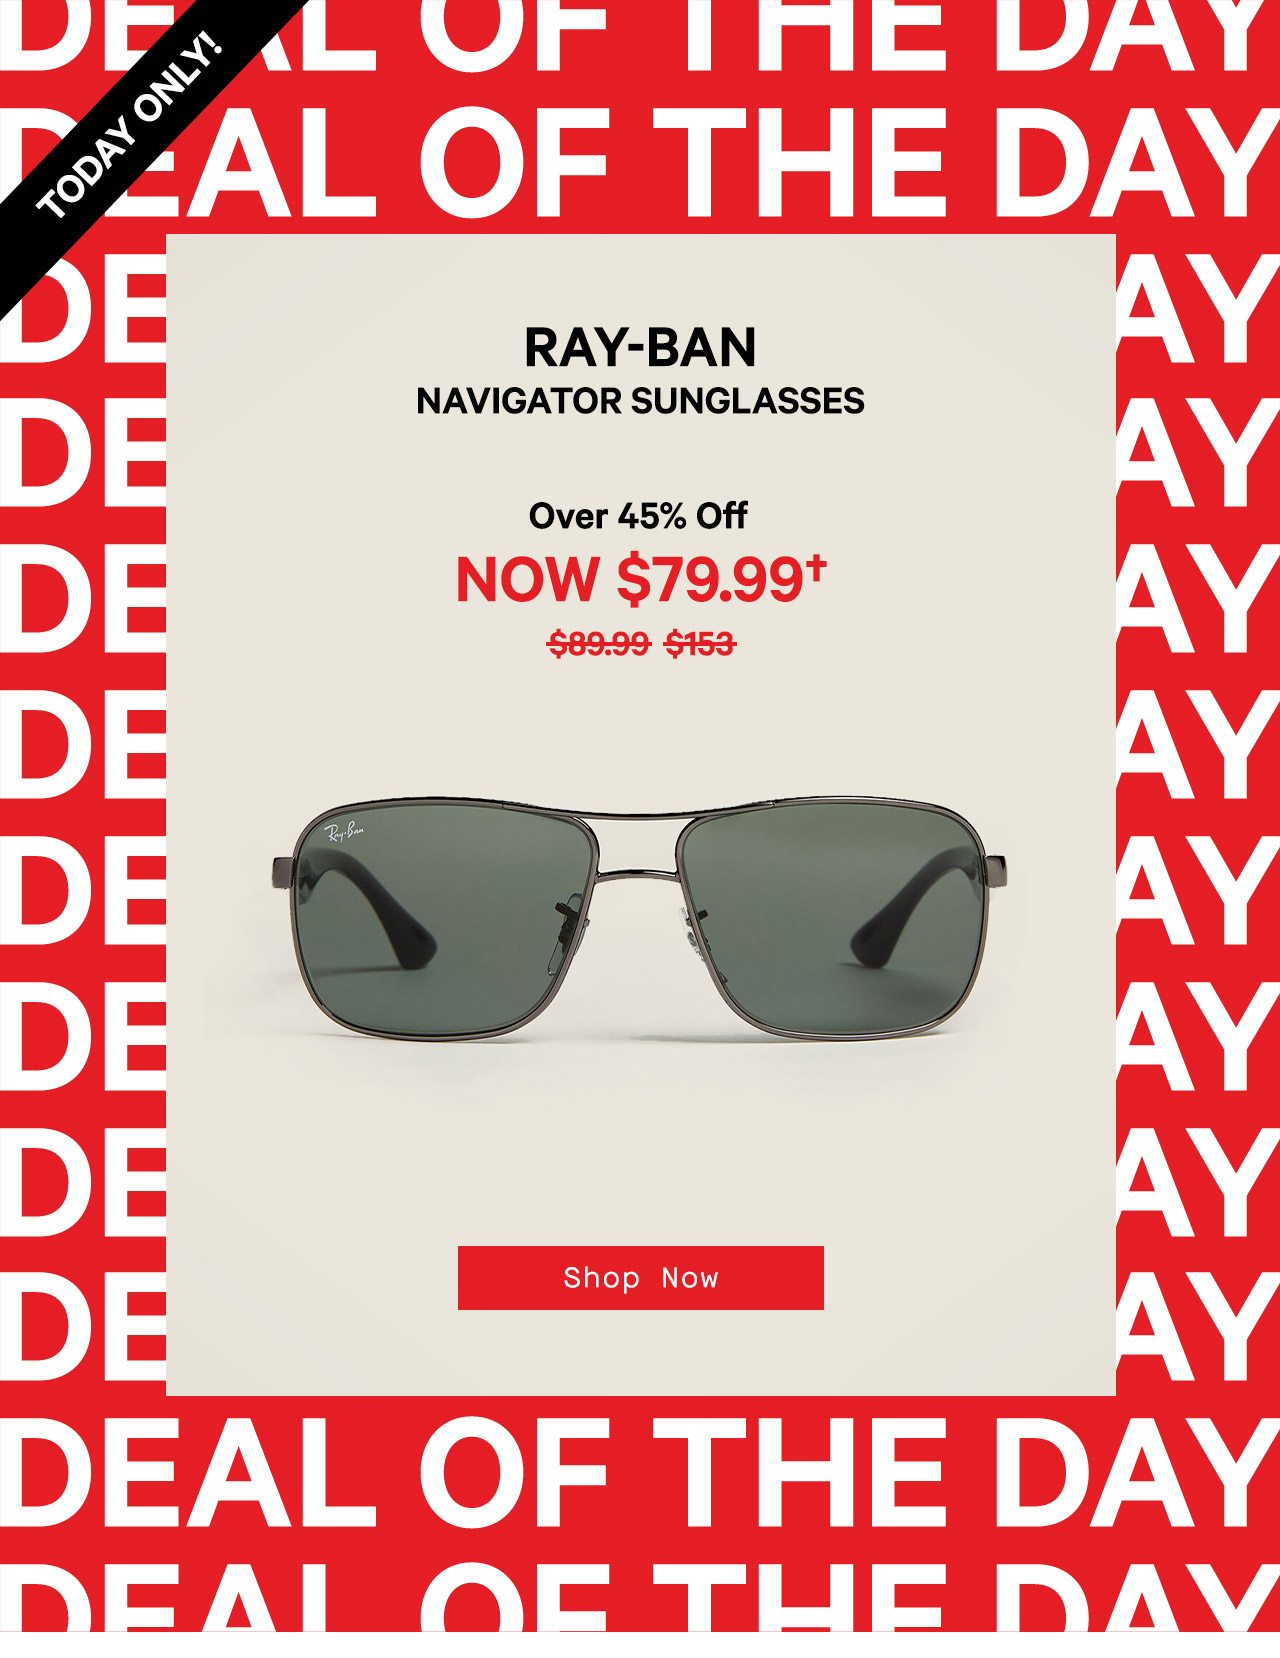 TODAY ONLY! Extra $10 OFF Ray-Ban Sunglasses - Century 21 Email Archive